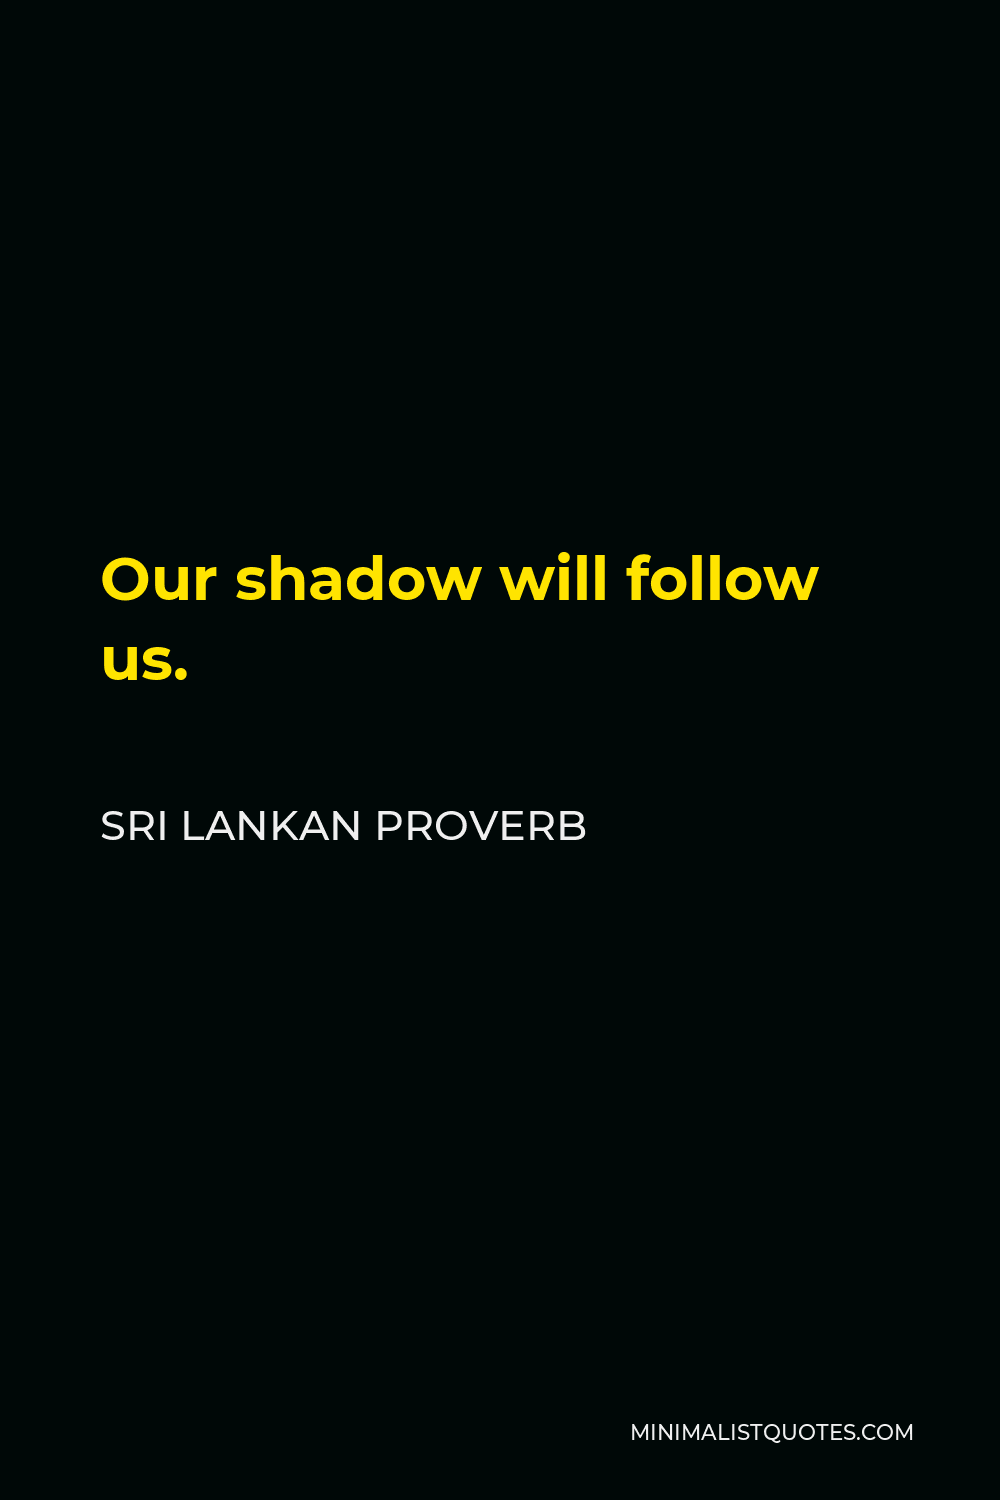 Sri Lankan Proverb Quote - Our shadow will follow us.